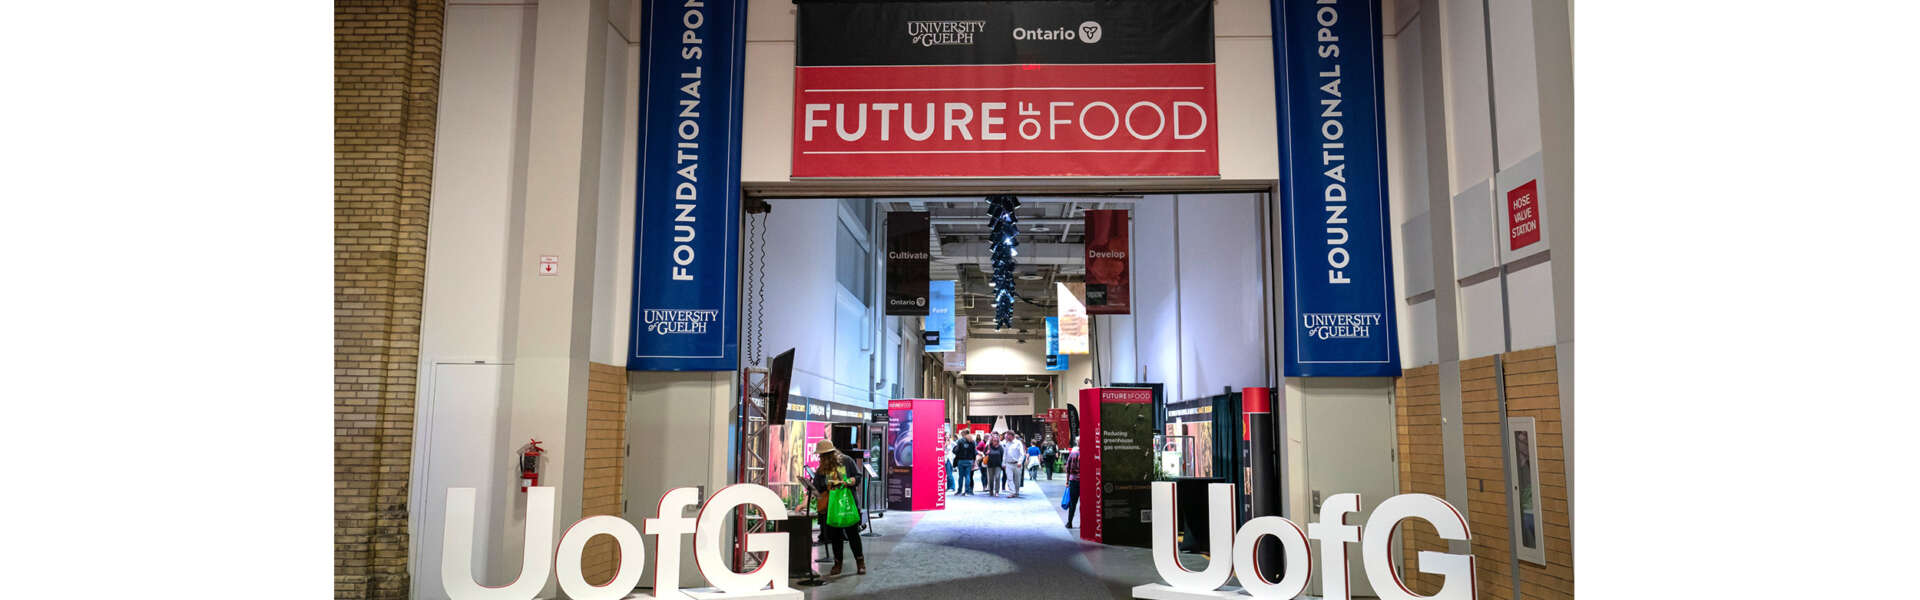 Blue and red signs with text that say University of Guelph are hung above a hall where people walk among exhibits showcasing research at the Royal Agricultural Winter Fair